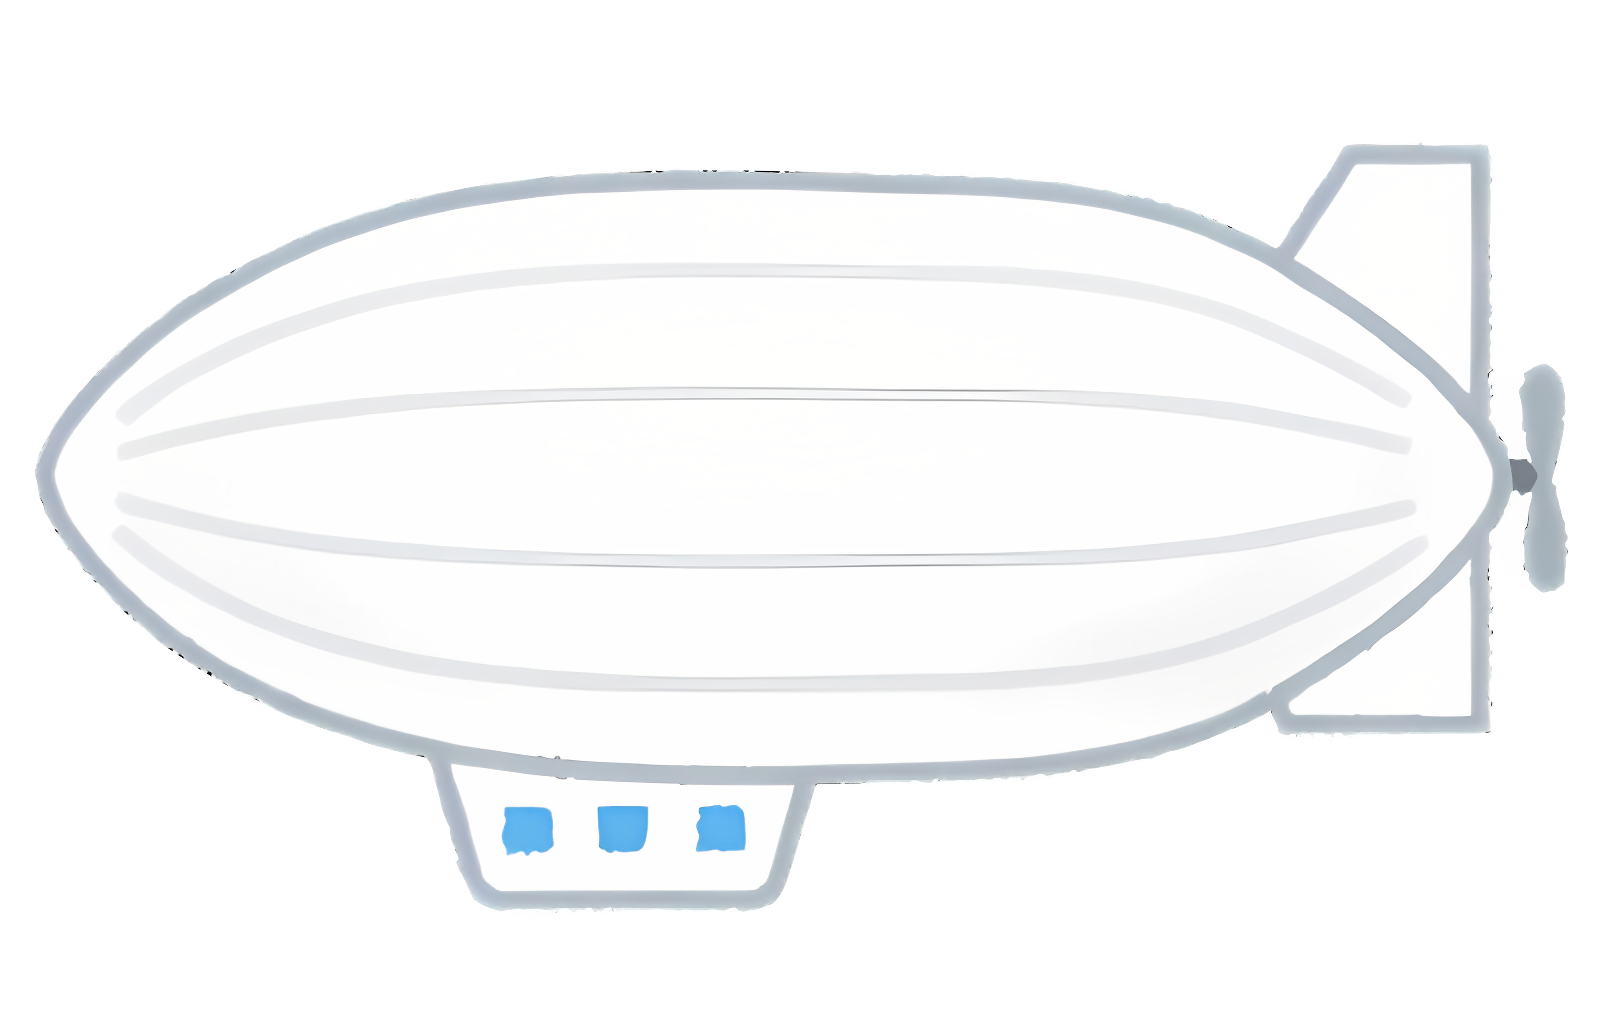 Large white airship with blue striped tail Clipart